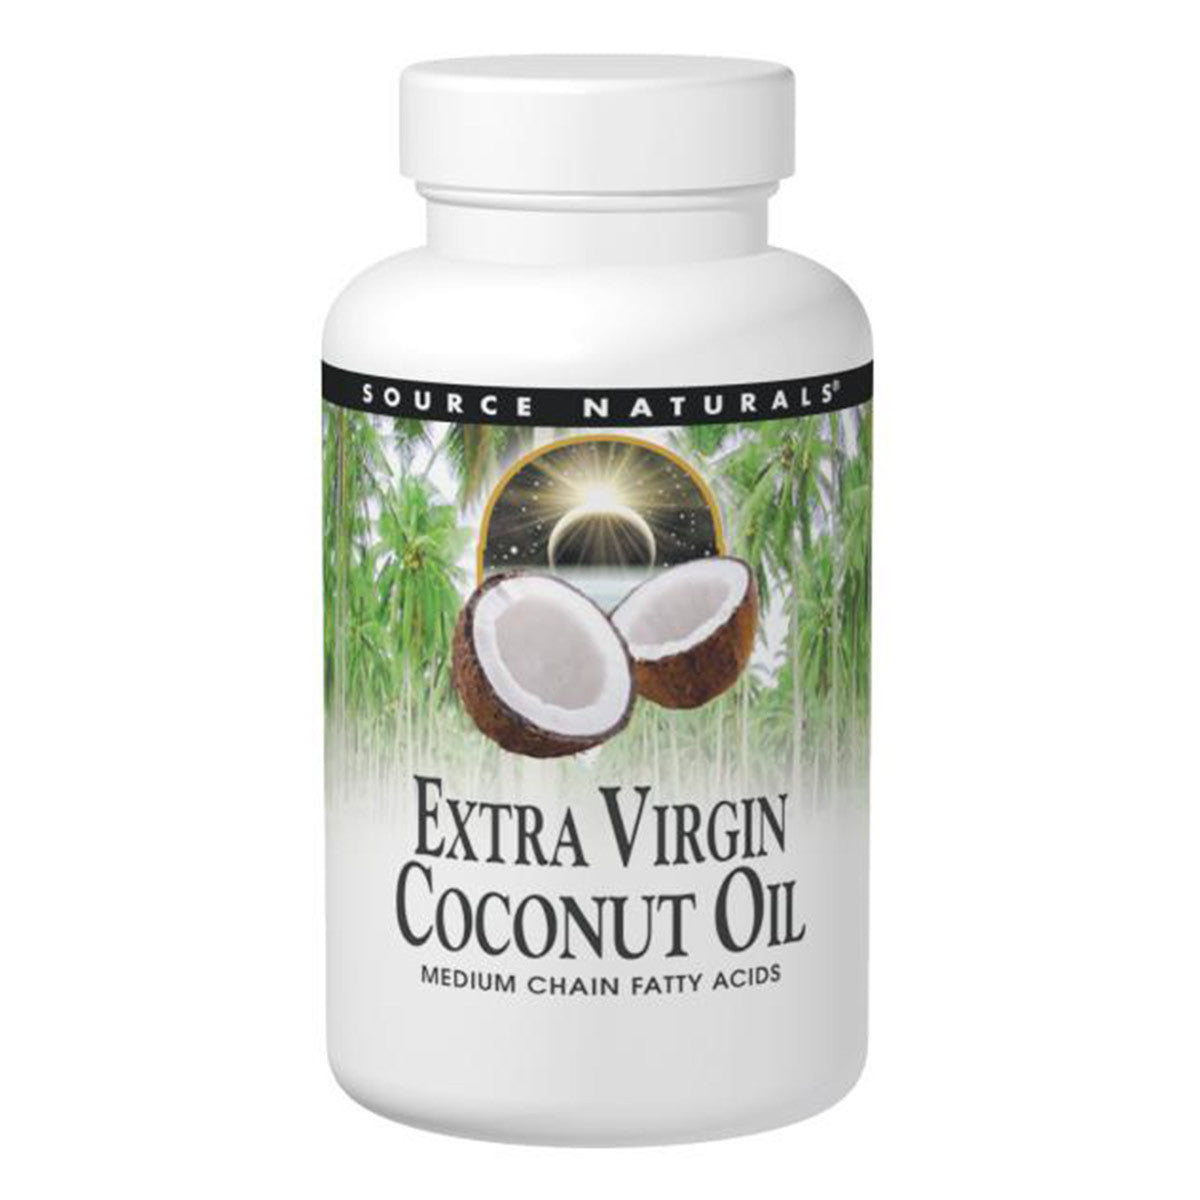 Primary image of Extra Virgin Coconut Oil Softgels